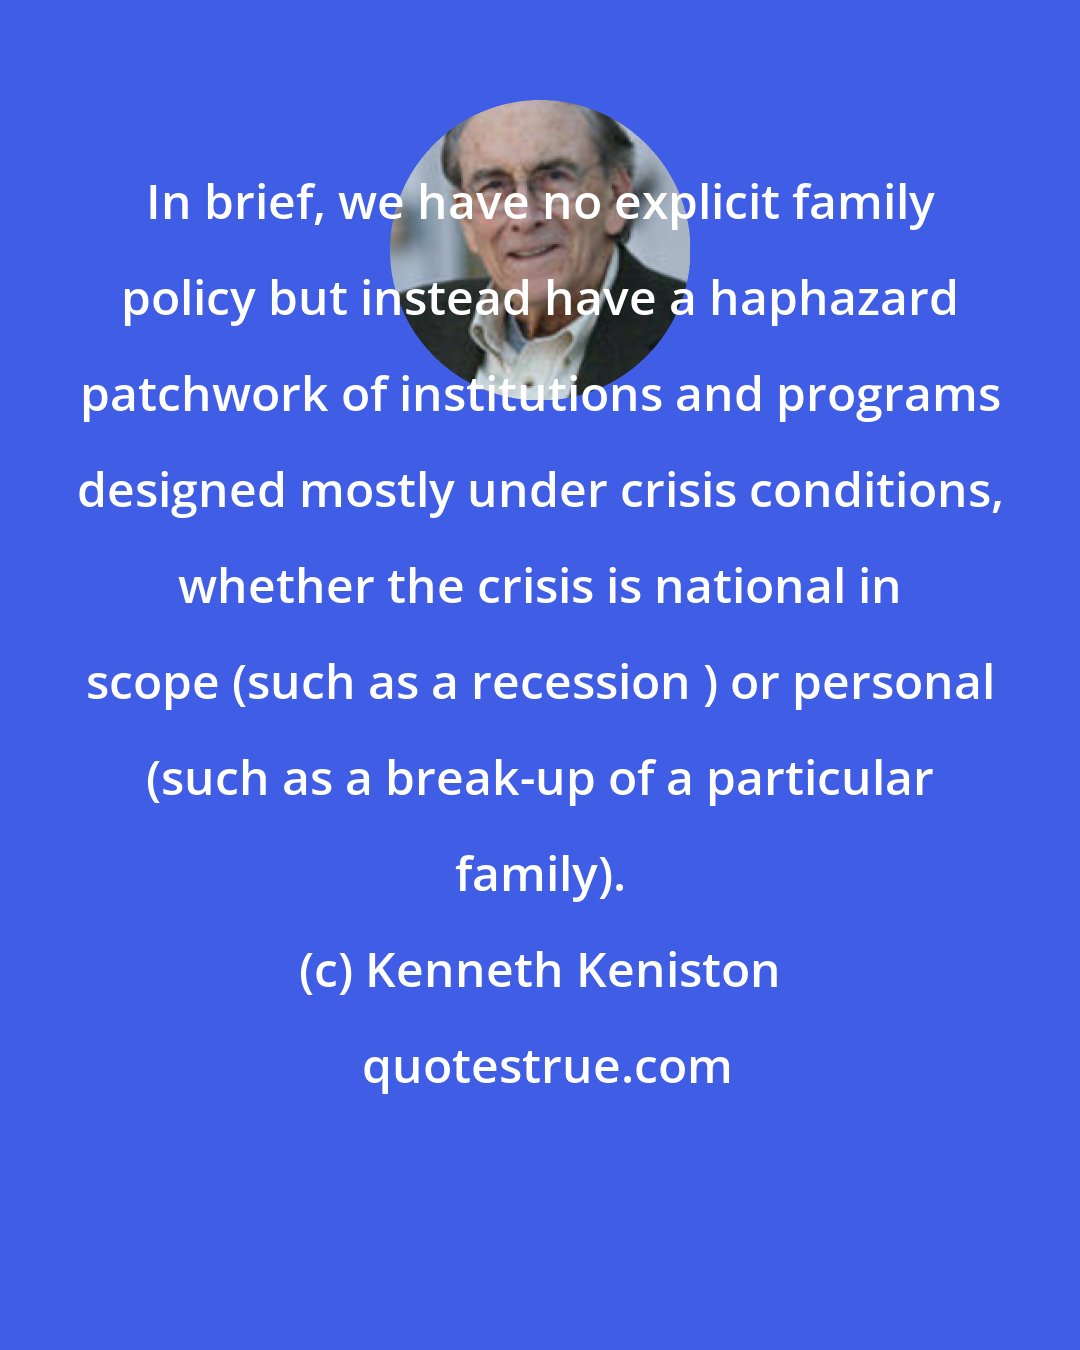 Kenneth Keniston: In brief, we have no explicit family policy but instead have a haphazard patchwork of institutions and programs designed mostly under crisis conditions, whether the crisis is national in scope (such as a recession ) or personal (such as a break-up of a particular family).